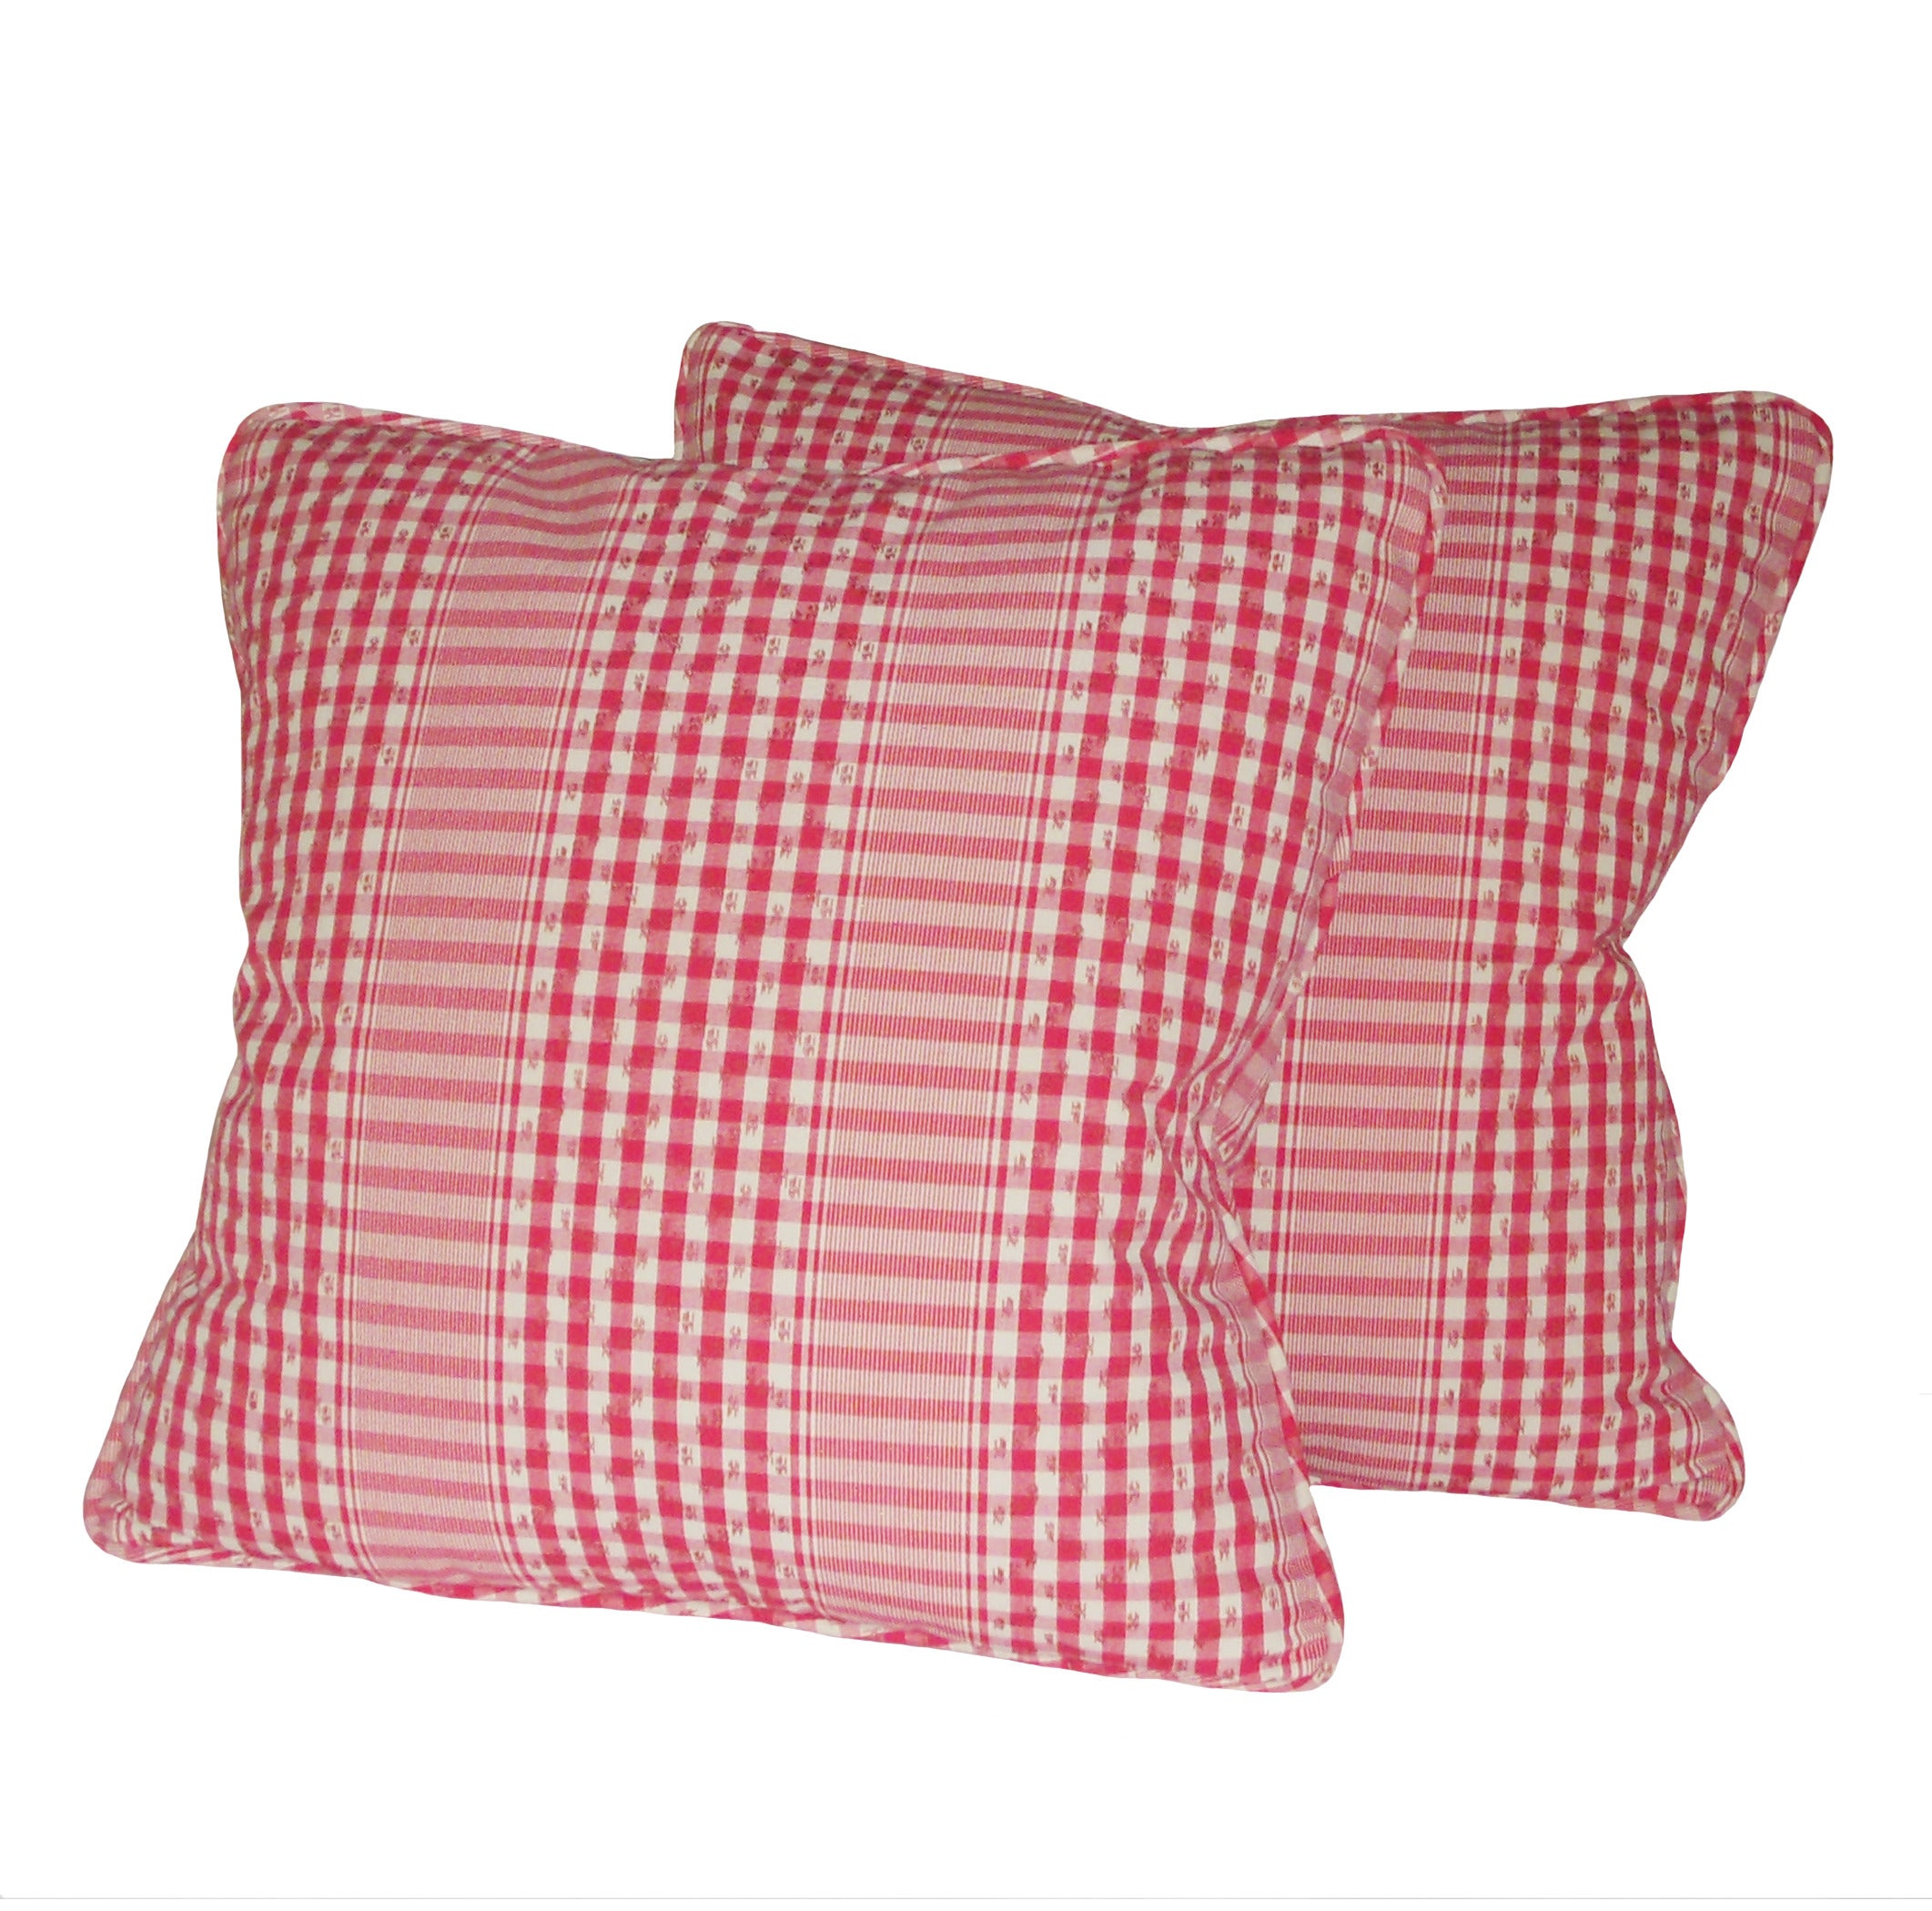 Pair of Red Gingham Pillows